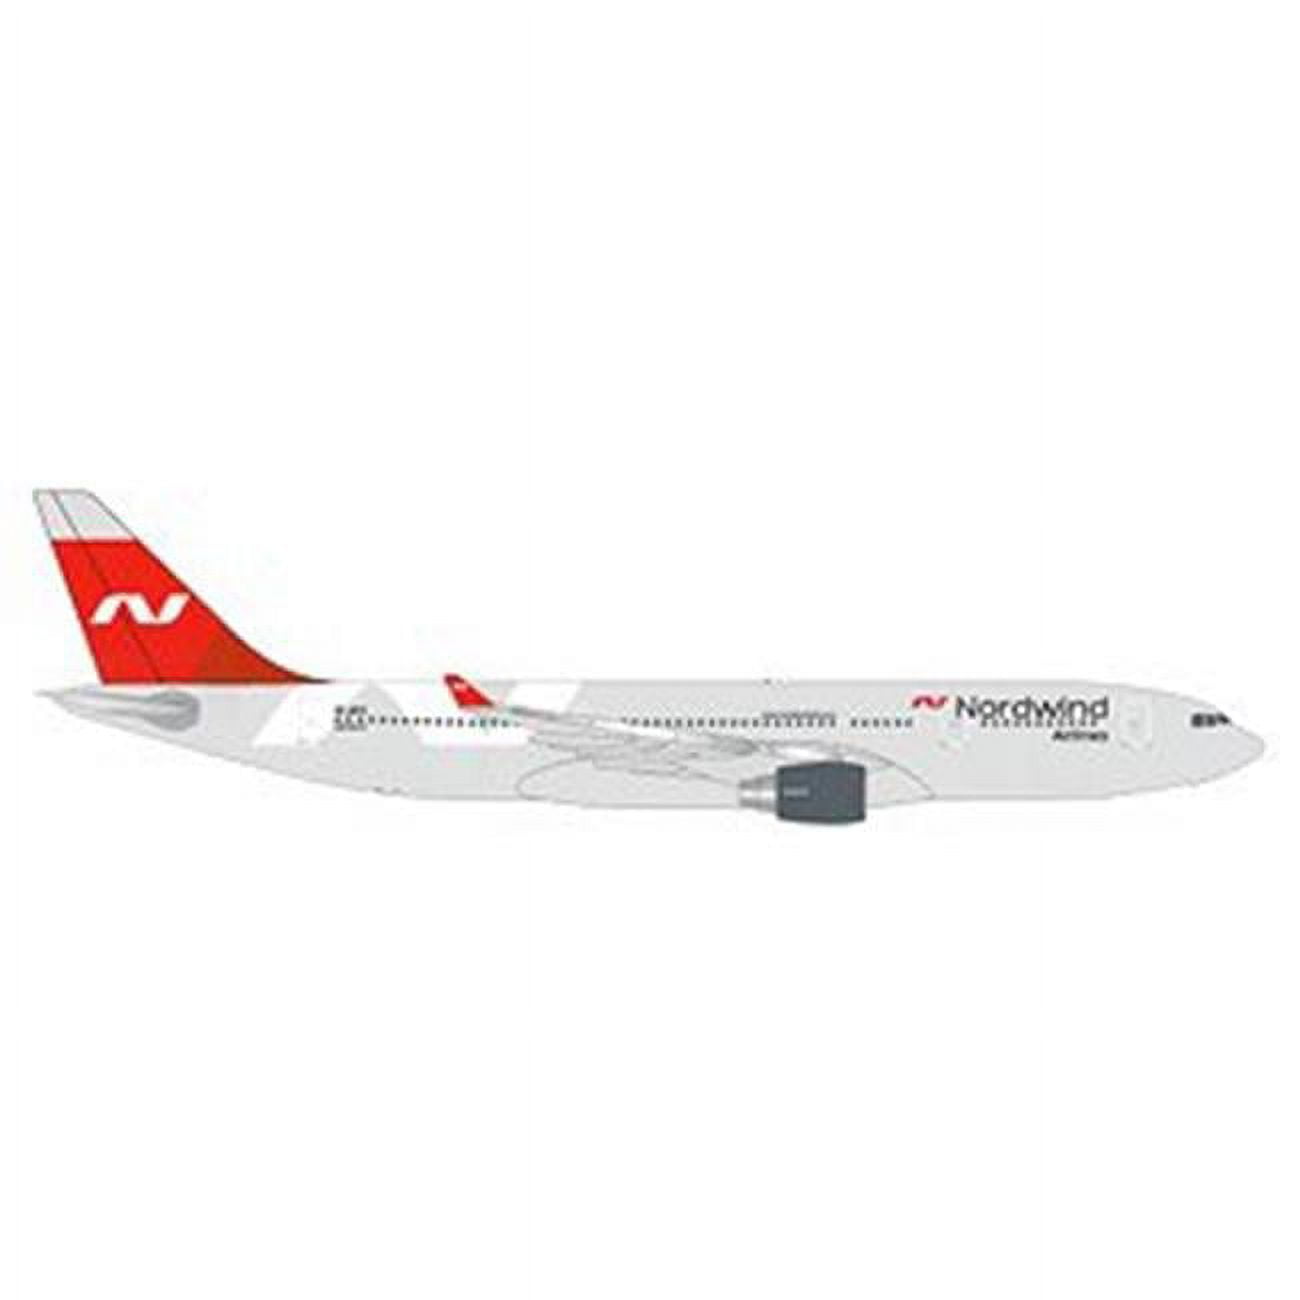 Herpa Wings He531771 1-500 Nordwind Airlines Airbus A330-200 Pre-built Aircraft